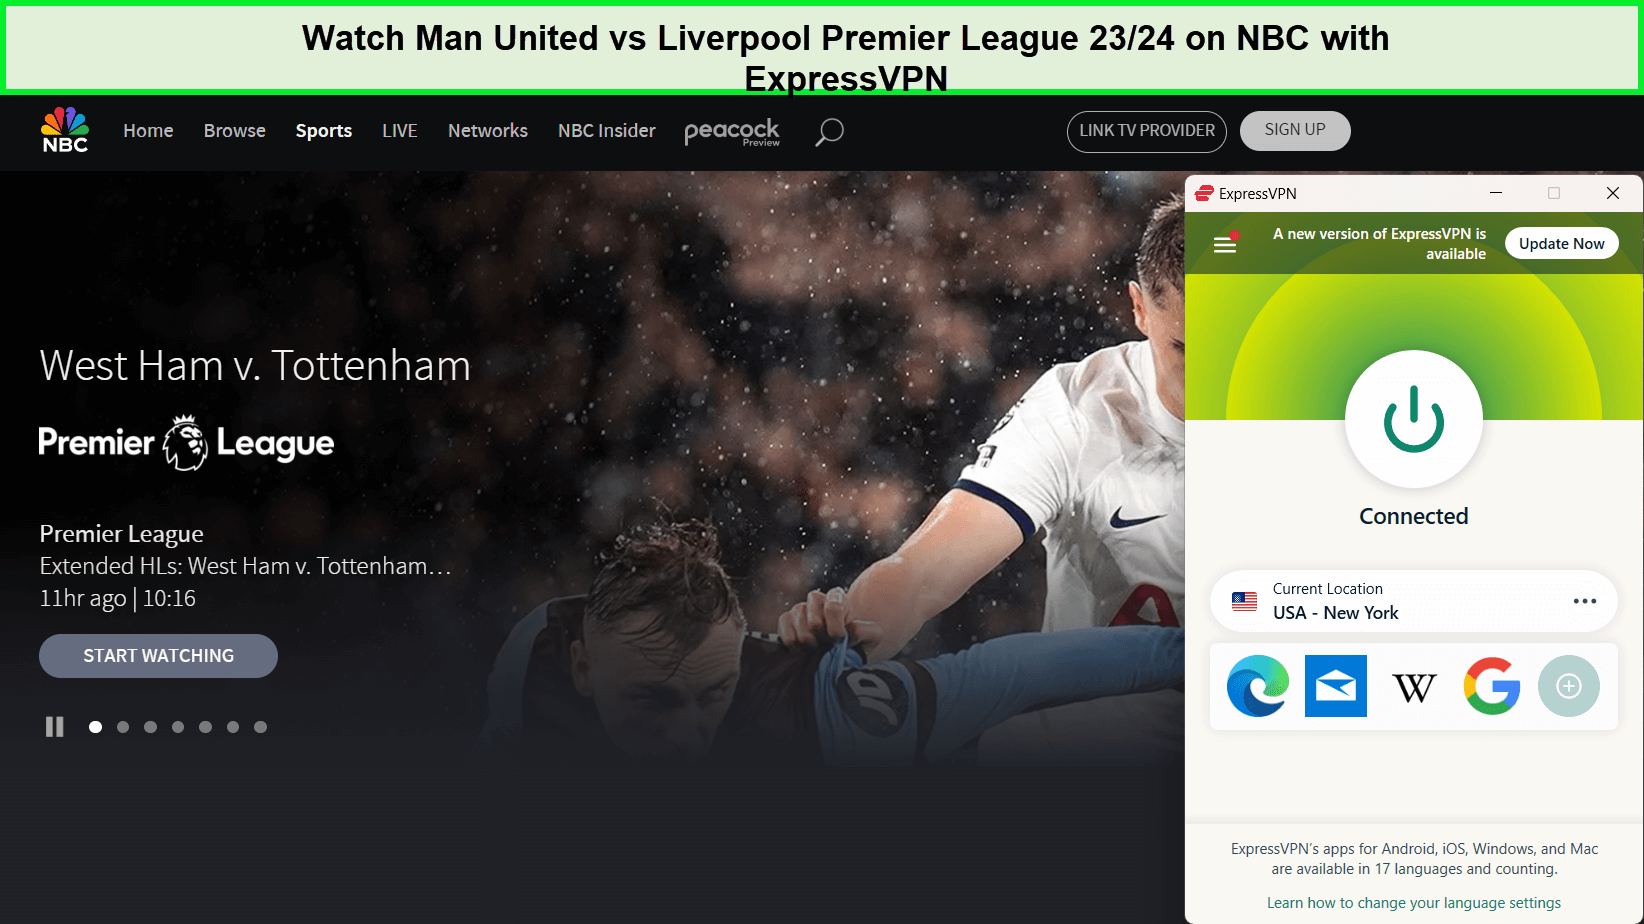 Watch-Man-United-vs-Liverpool-Premier-League-23-24-in-India-on-NBC